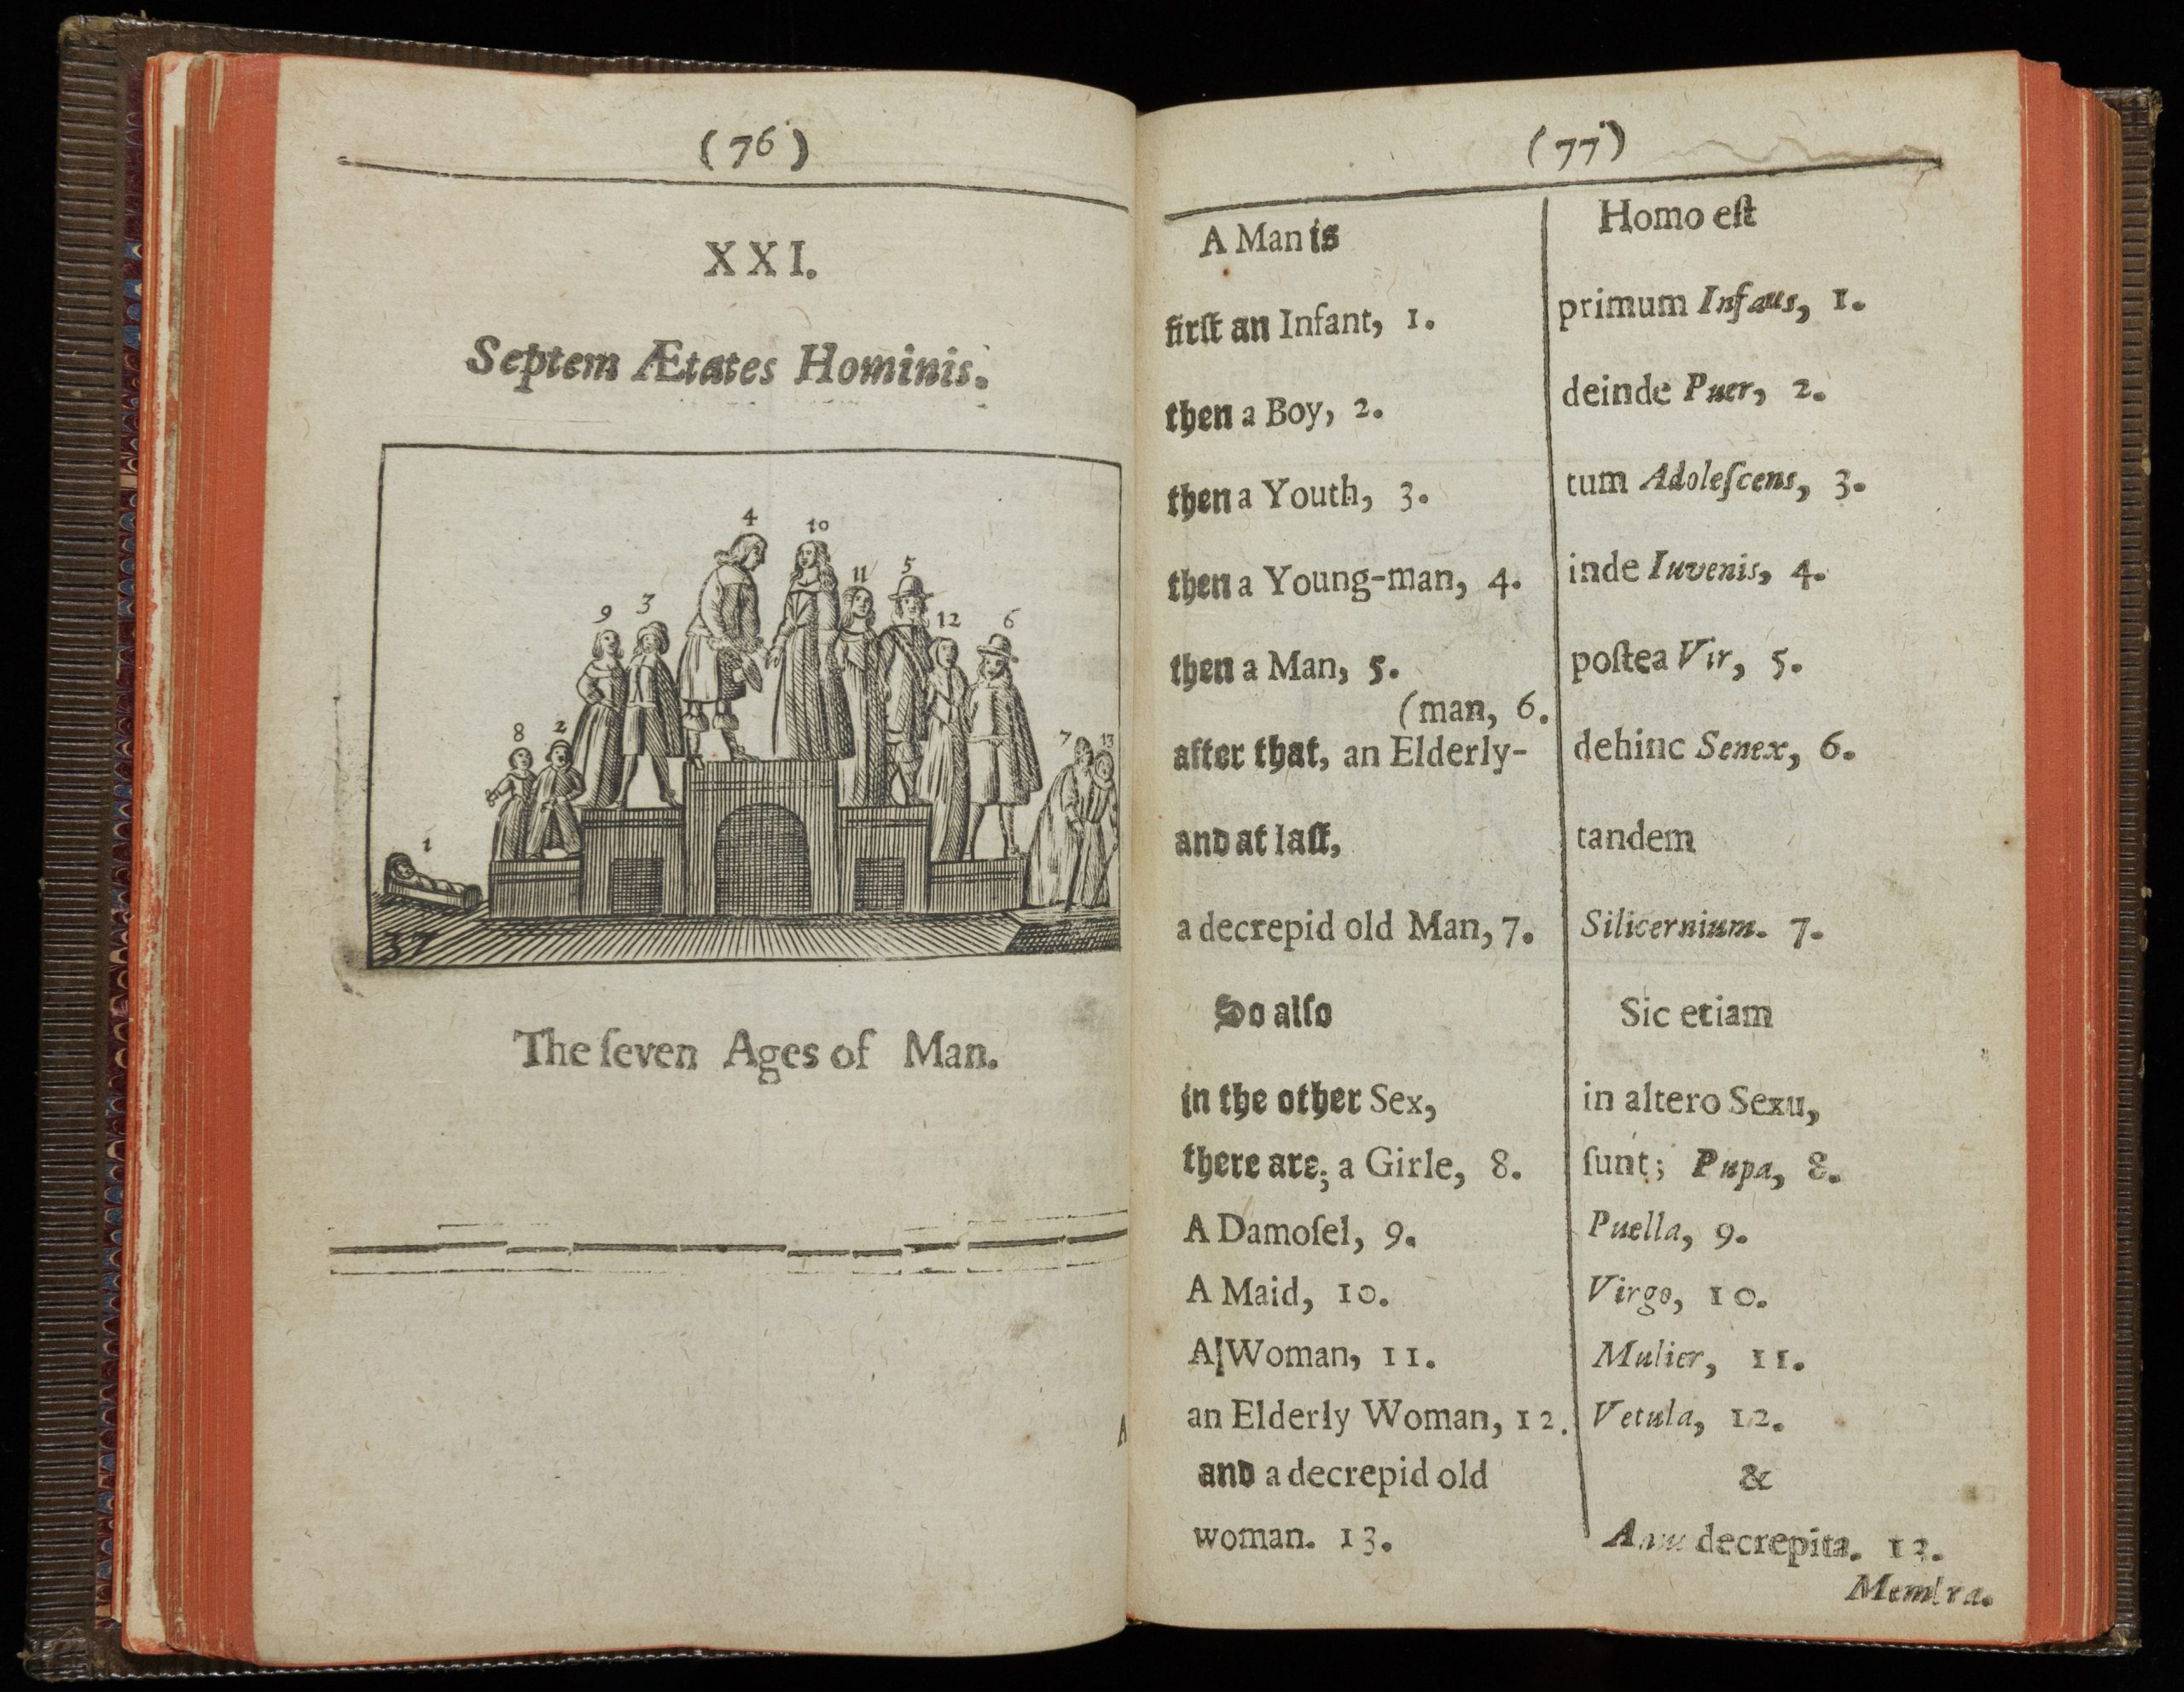 Two-page spread of an early printed book. Text is in English and Latin in black in an 17th-century font (some "s"s written as "f"s). On the left-hand side is a woodcut print illustration of a steped podium, with the tallest piece in the middle and two shorter ones on either side. On the far left next to the podium is an infant in a cradle (numbered 1 above its head). On the lowest, left-hand step are a boy (numbered 2) and a girl (numbered 8). On the next step are a teenage boy (numbered 3) and a teenage girl (numbered 9). On the highest step are a full-grown but young man (numbered 4) and woman (numbered 10). On the middle, right-hand step are a man (numbered 5) and woman (numbered 11) in early middle age. On the next step are a man (numbered 6) and woman (numbered 12) in later middle age. On the ground on the right-hand side are an old man (numbered 7) and woman (numbered 13). All wear 17th-century-style clothes. On the right-hand page is text in English and in Latin. In English it reads, "A Man is/firft an Infant, 1./then a Boy, 2./ then a Youth, 3./ then a Young-man, 4./then a Man, 5./after that, an Elderly-man, 6./and at laft/a decrepid old Man, 7./ So alfo/in the other Sex,/ there are a Girle, 8./A Damofel, 9./A Maid, 10./A Woman,11./an Elderly Woman, 12./and a decrepid old woman. 13."